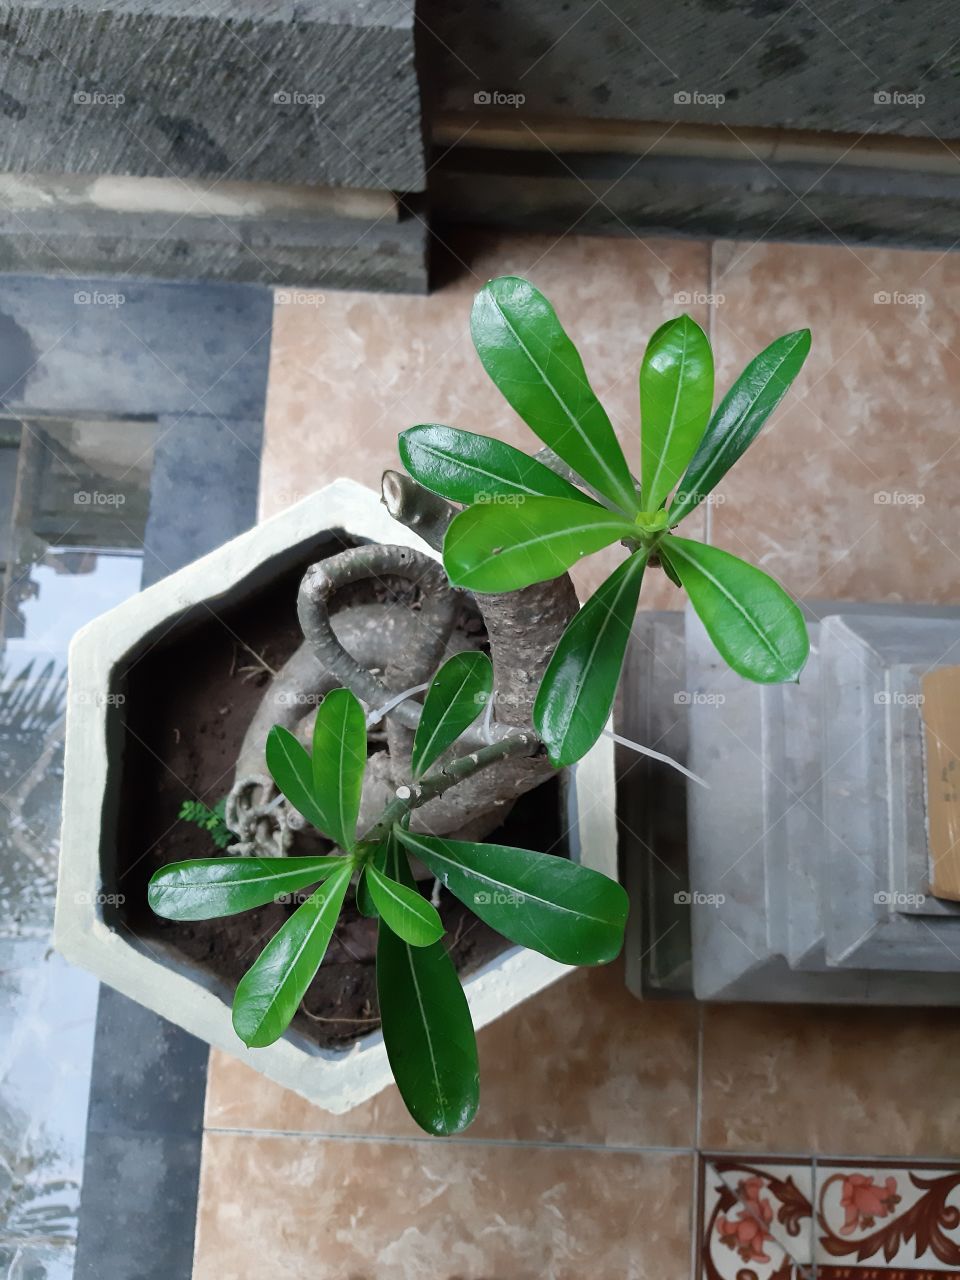 This is a young adenium obesum in a concrete pot. This plant is categorized as a decorative plants and mostly found in tropical countrues like In Indonesia. In Bali, its flower is used as a means of praying.